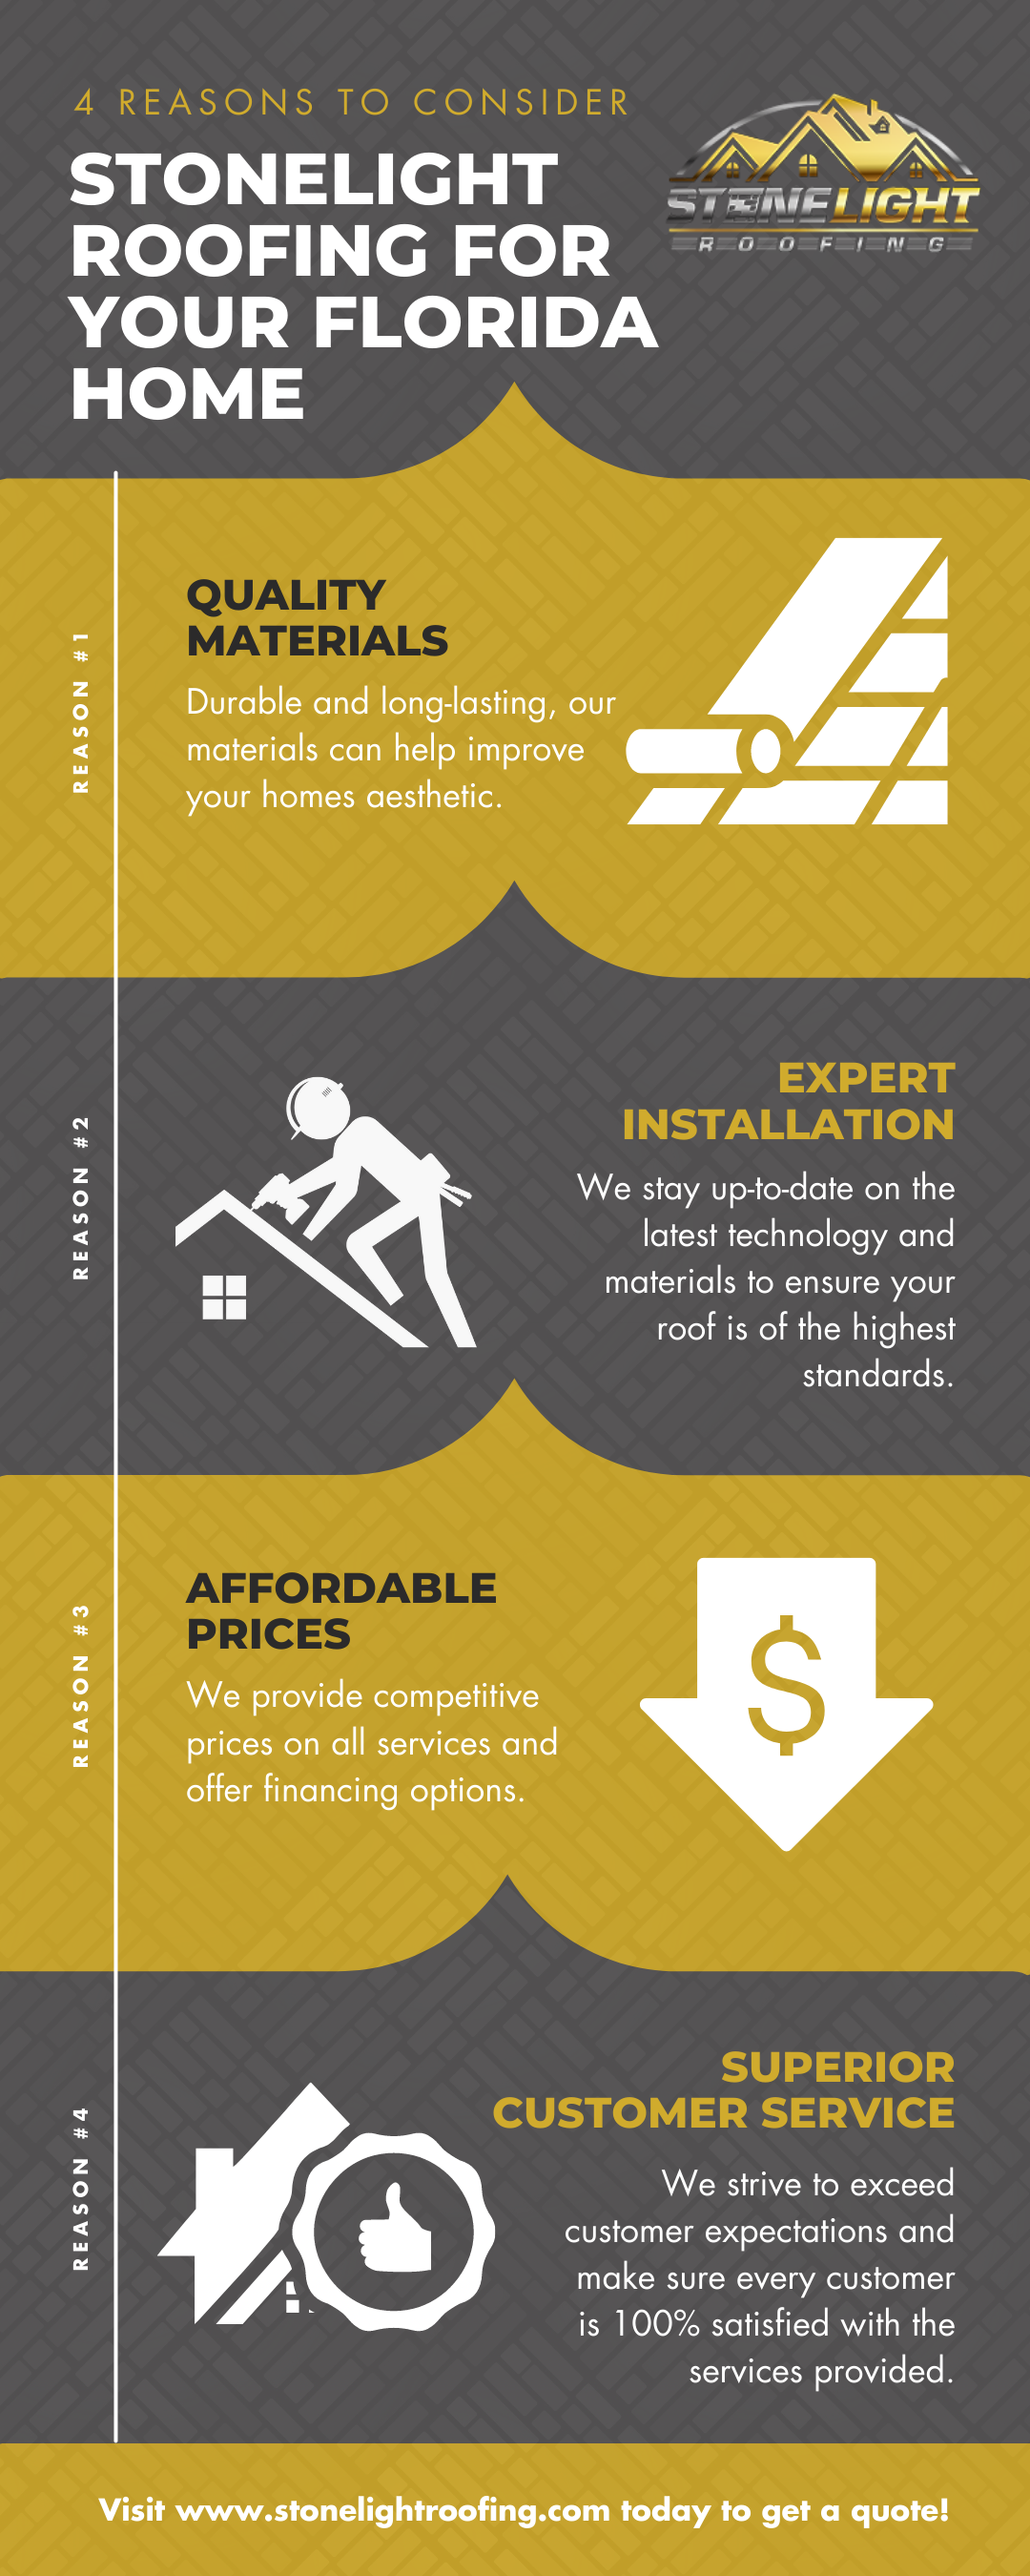 M37913 - Infographic - 4 Reasons to Consider Stonelight Roofing for Your Florida Home.png